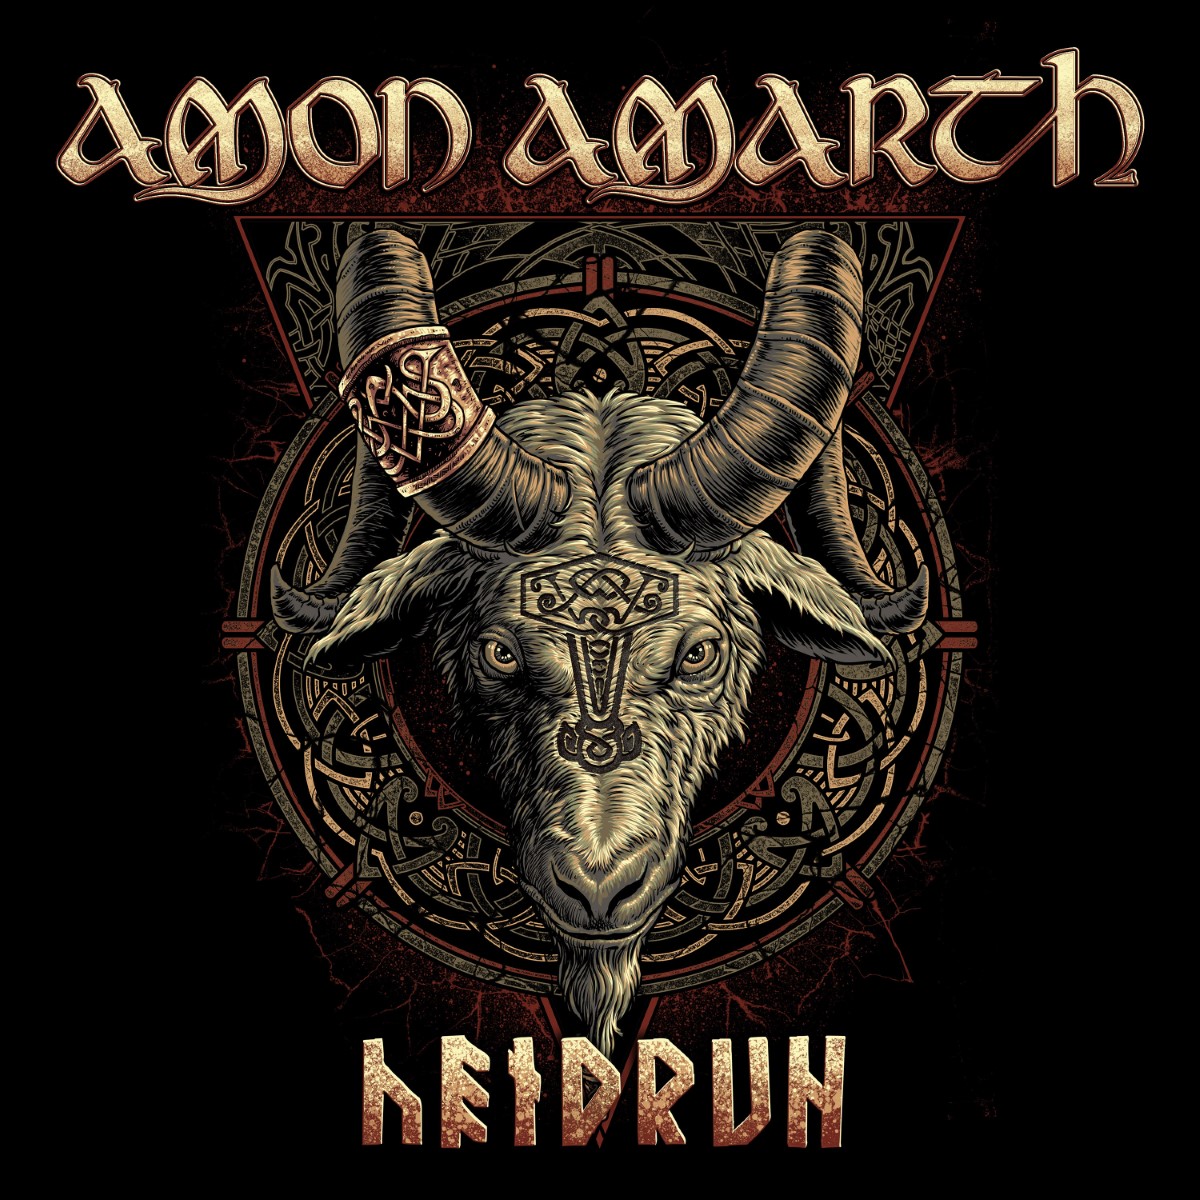 Swedish Viking Metal Band Amon Amarth Reported Dead in New"Heidrun" Music Video From Upcoming EP